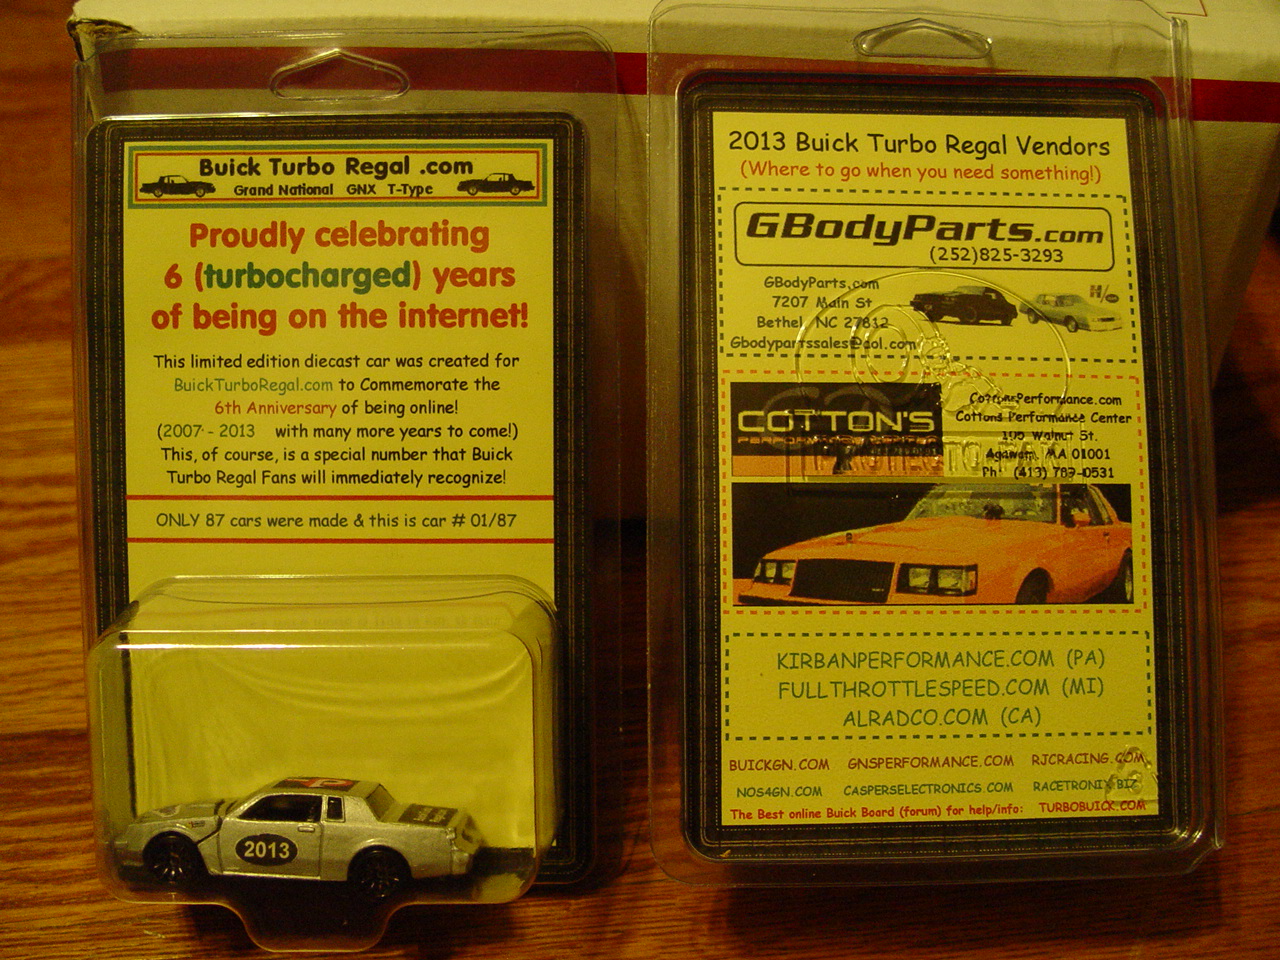 BuickTurboRegal.com Celebrates 6 years Online! Special Diecast Car Created!